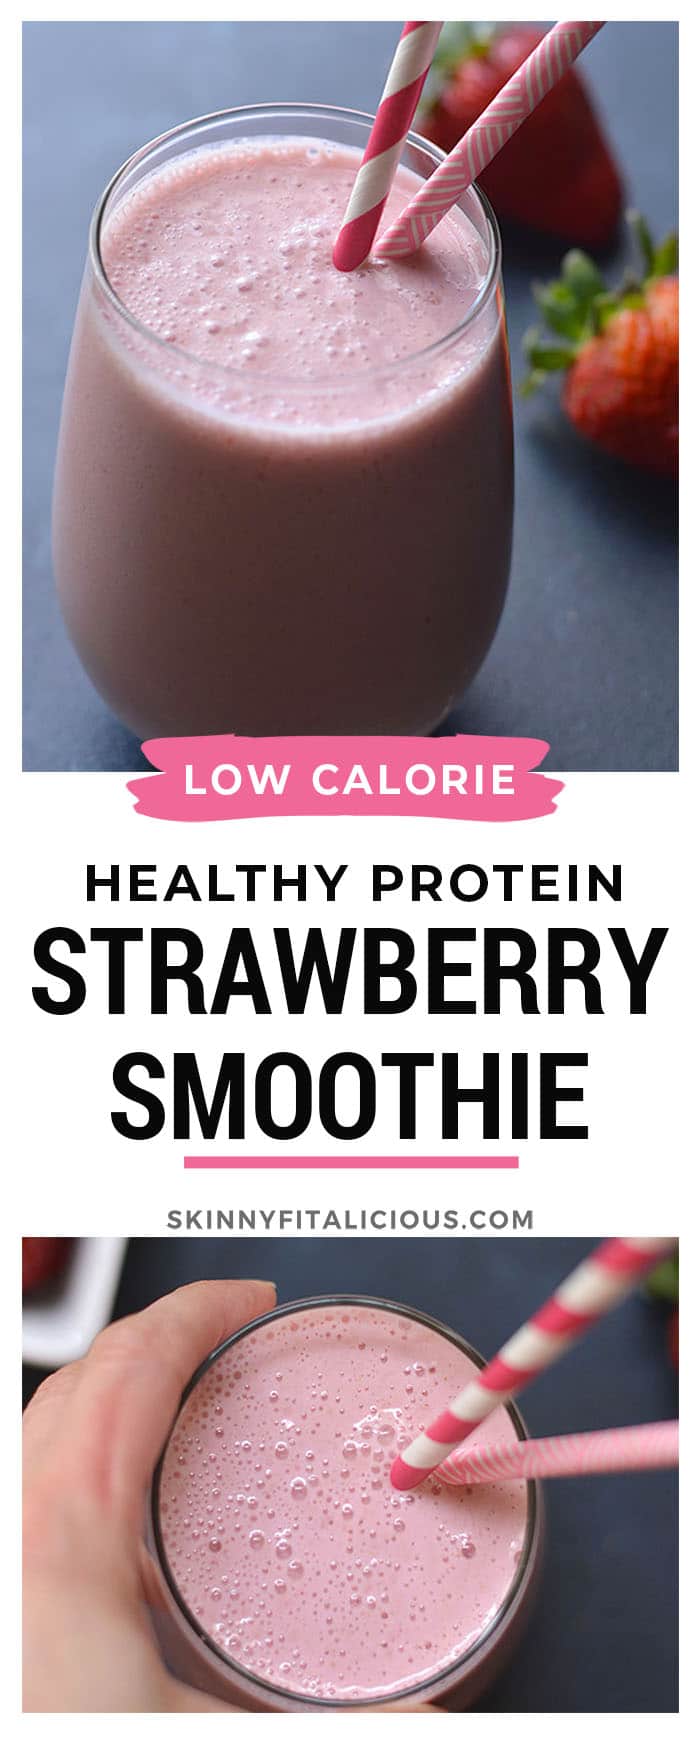 This Strawberry Greek Yogurt Smoothie is perfect for breakfast on the go. High protein with 3 ingredients and no added sugar. Rich in Vitamin C and antioxidants!